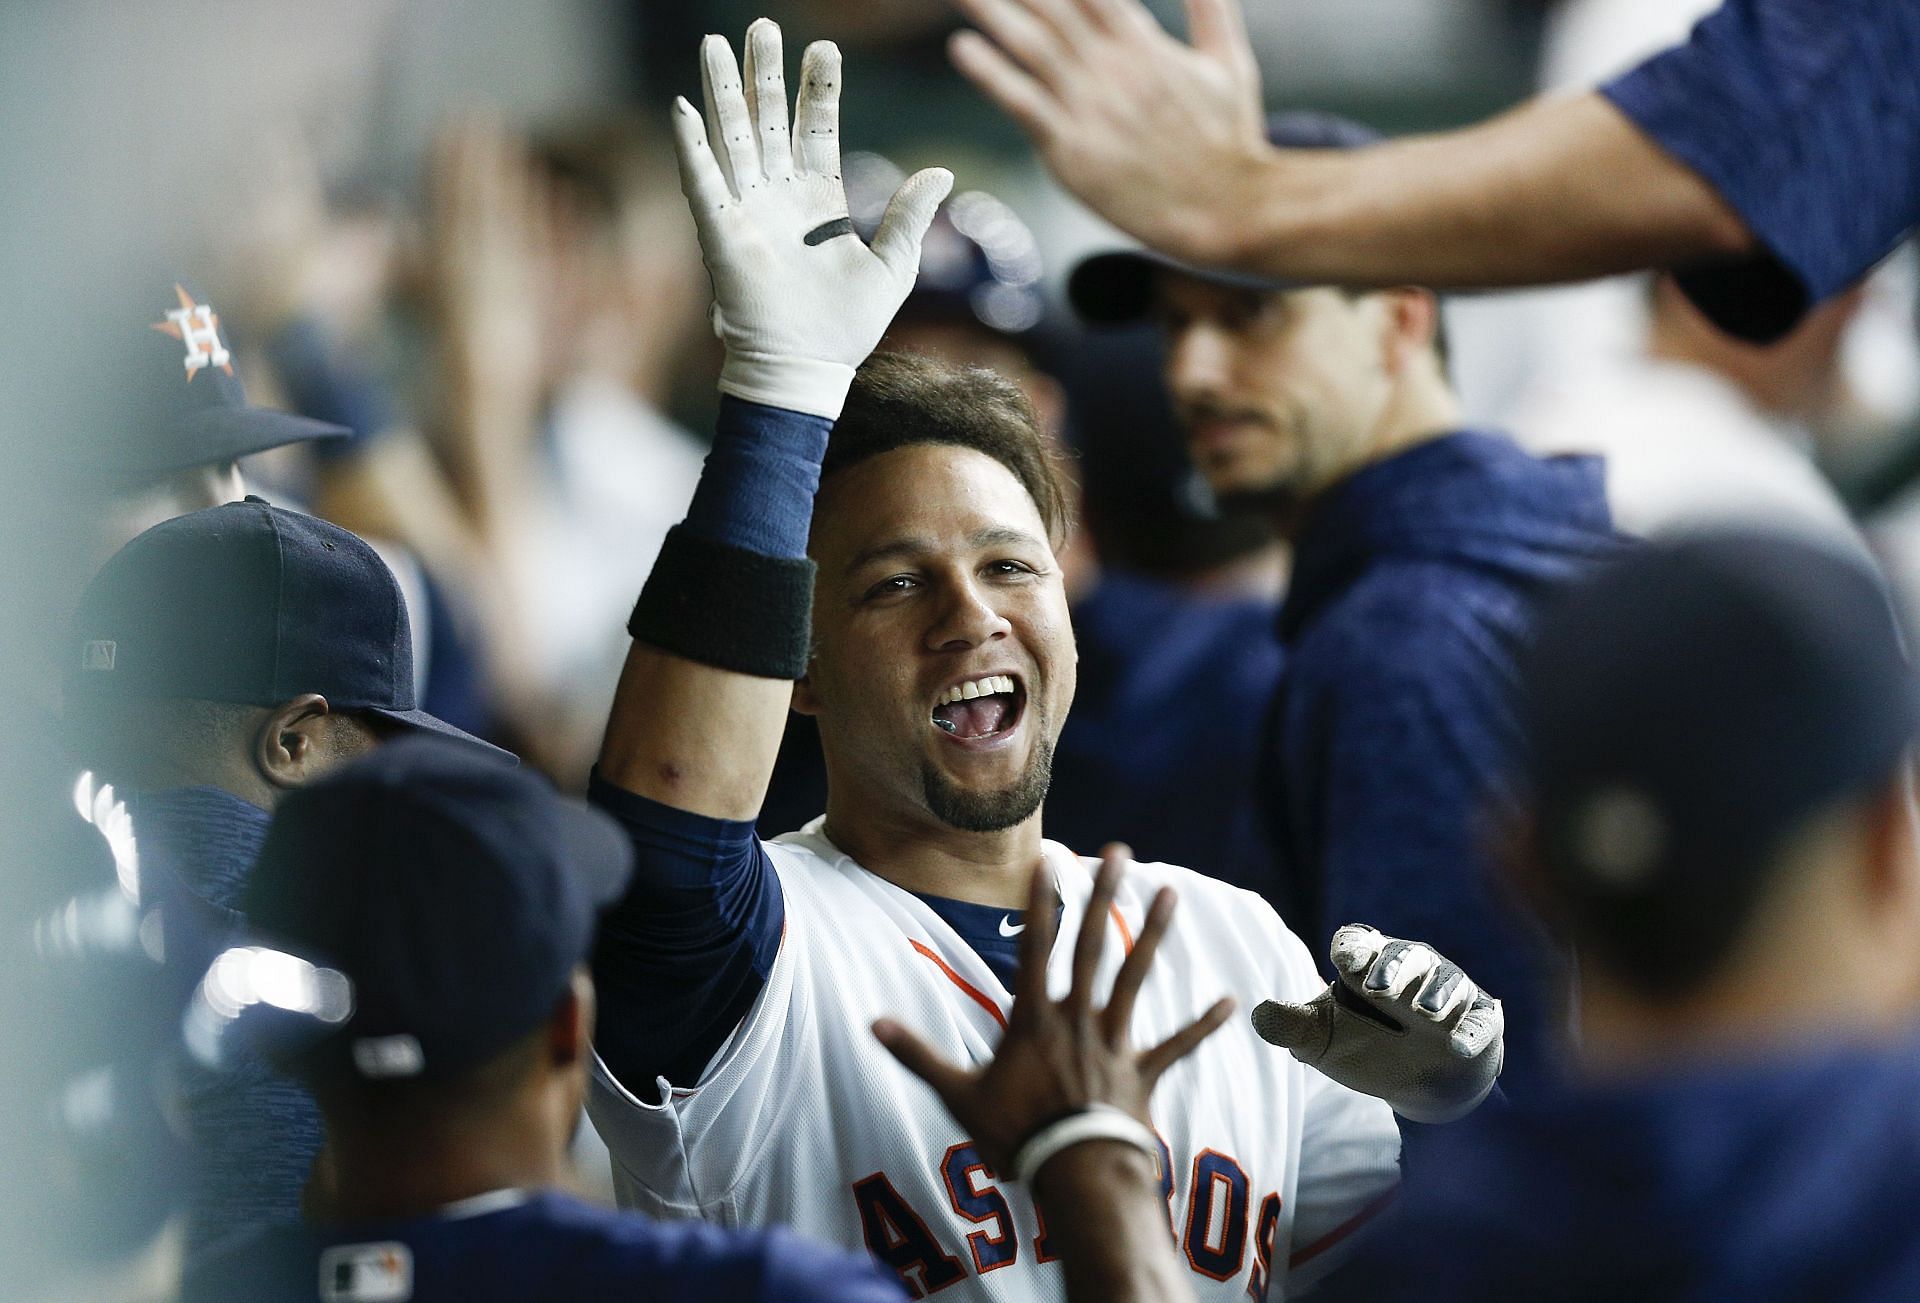 HOUSTON, TX - JULY 07: Yuli Gurriel #10 of the Houston Astros celebrates in the dugout after hitting a three-run home run in the third inning against the Chicago White Sox at Minute Maid Park on July 7, 2018 in Houston, Texas. (Photo by Bob Levey/Getty Images)